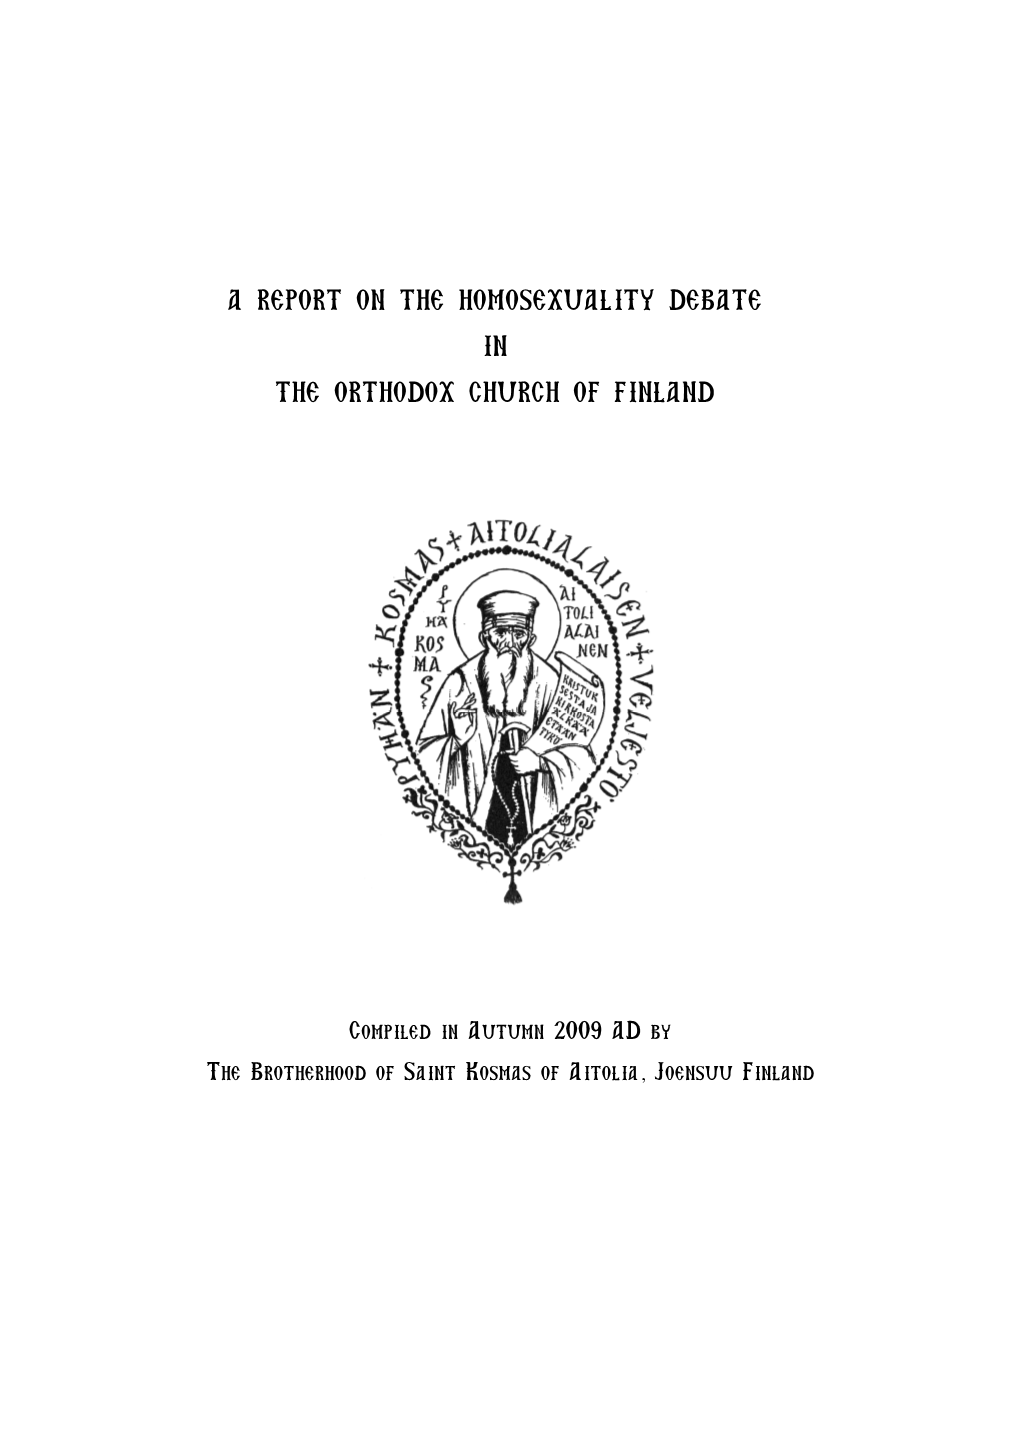 A Report on the Homosexuality Debate in the Orthodox Church of Finland